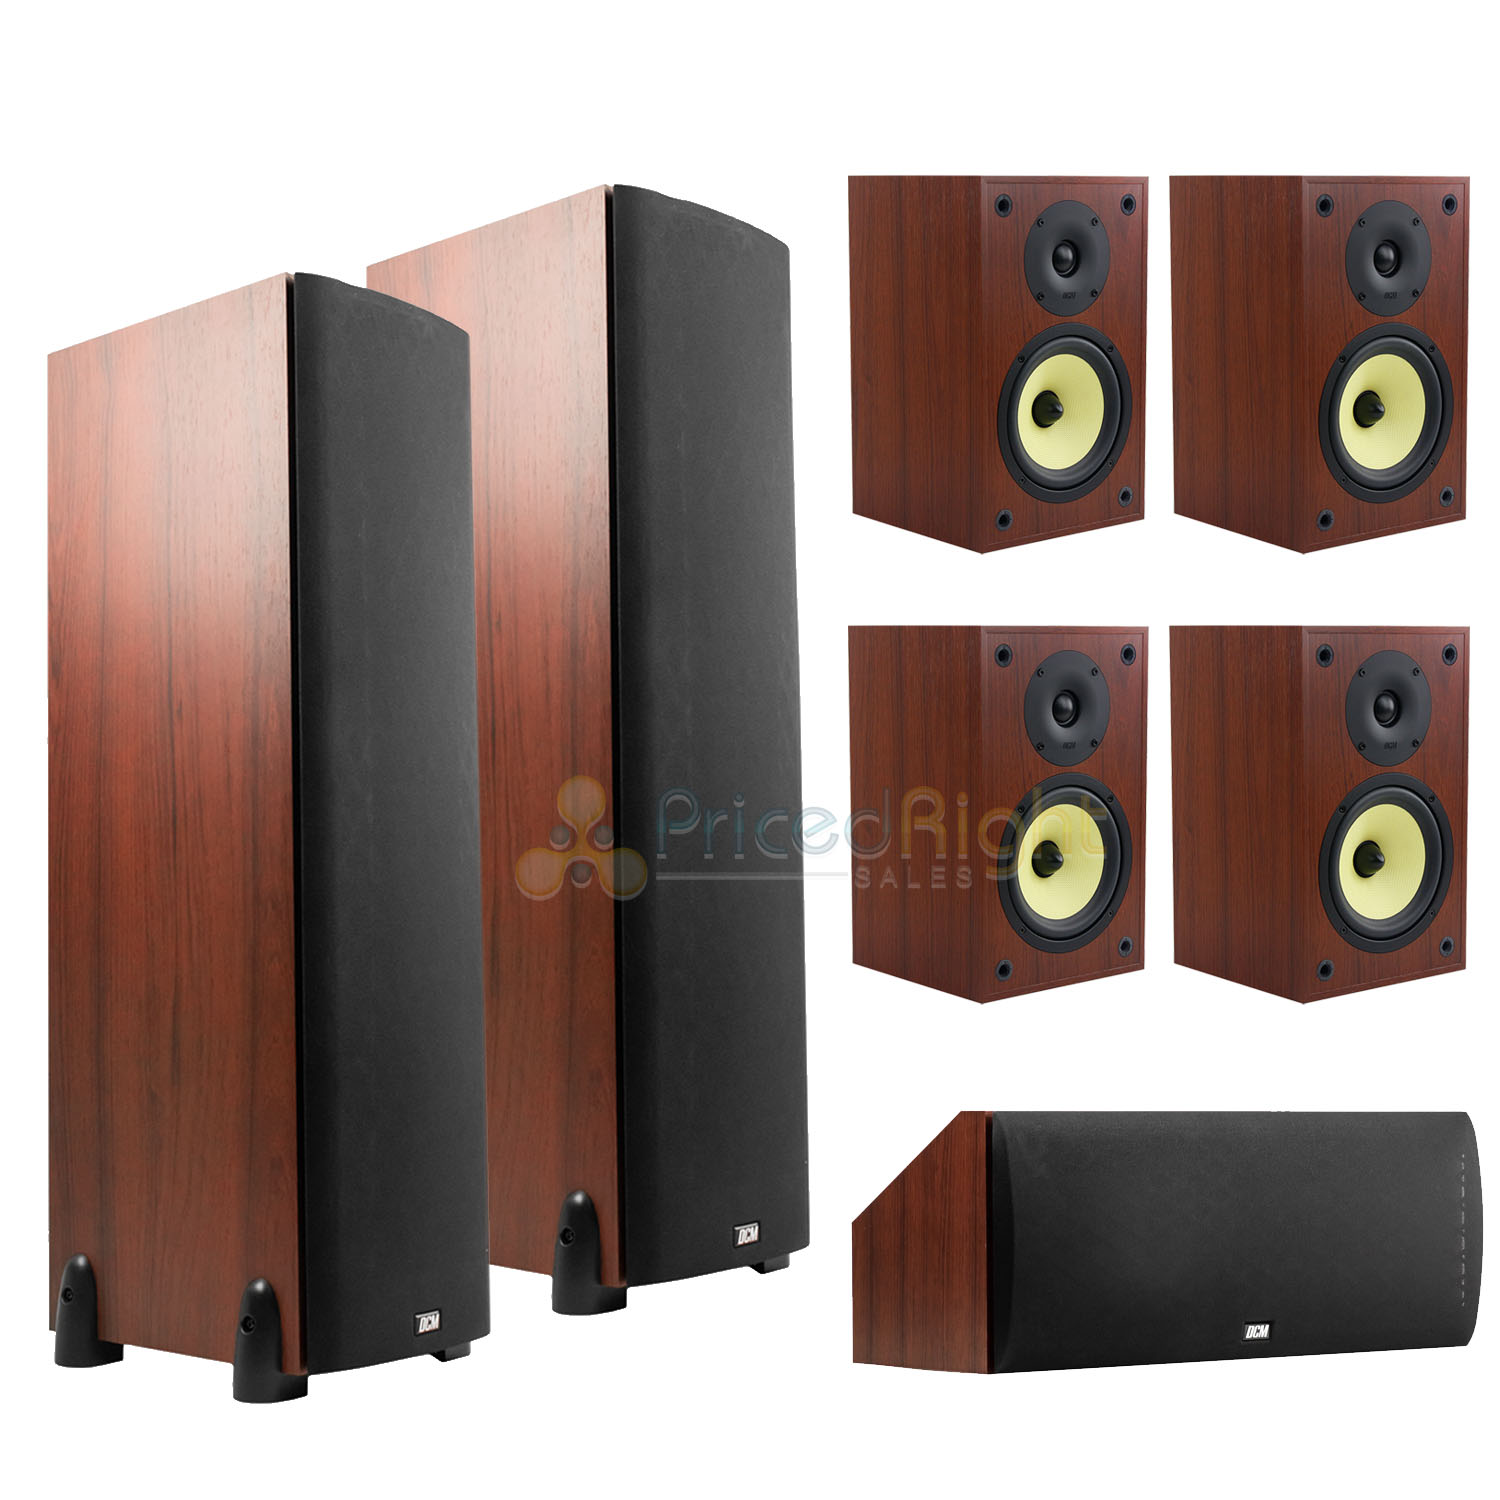 7 0 Dcm Speaker System A Serious Good Price Audioholics Home